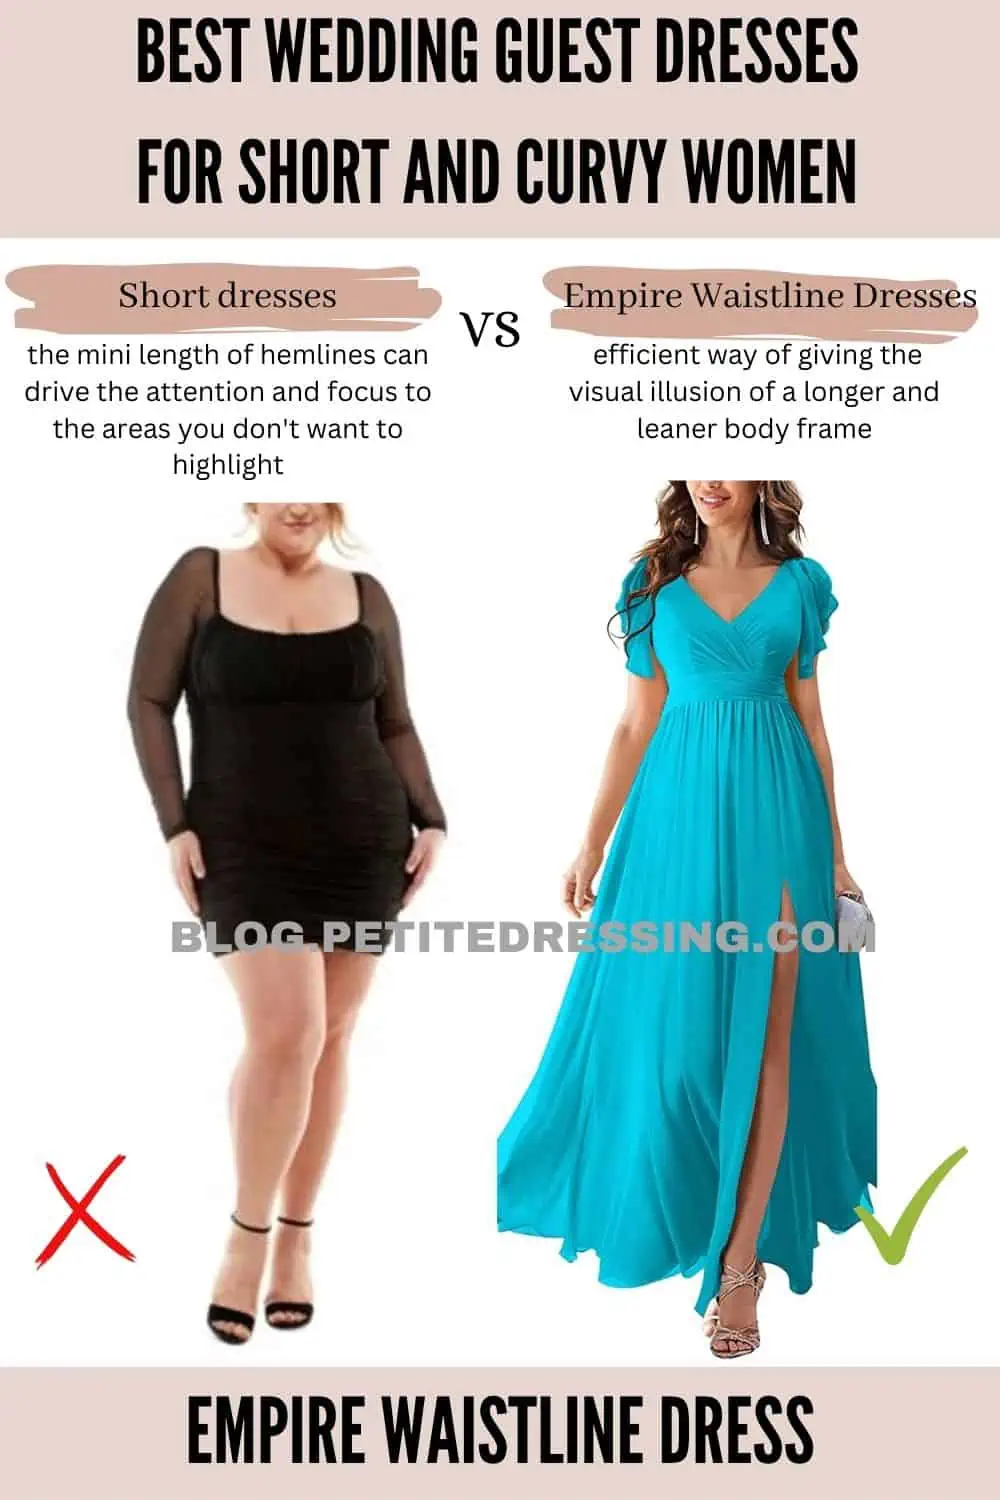 Wedding Guest Dresses Guide for Short and Curvy Women - Petite Dressing